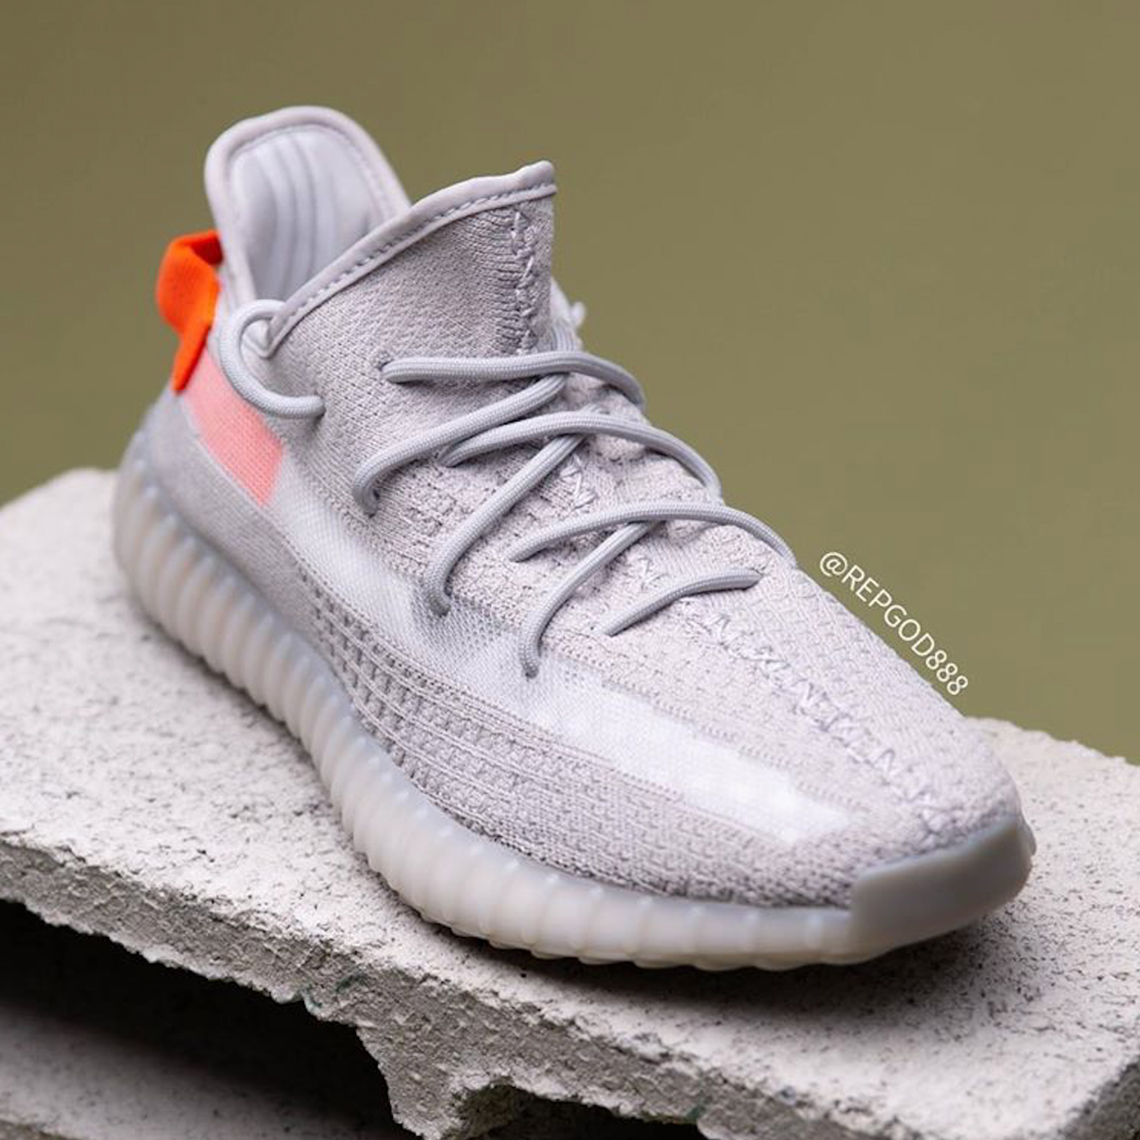 Cheap Authentic Yeezy Boost 350 V2 Marsh Kids Shoes